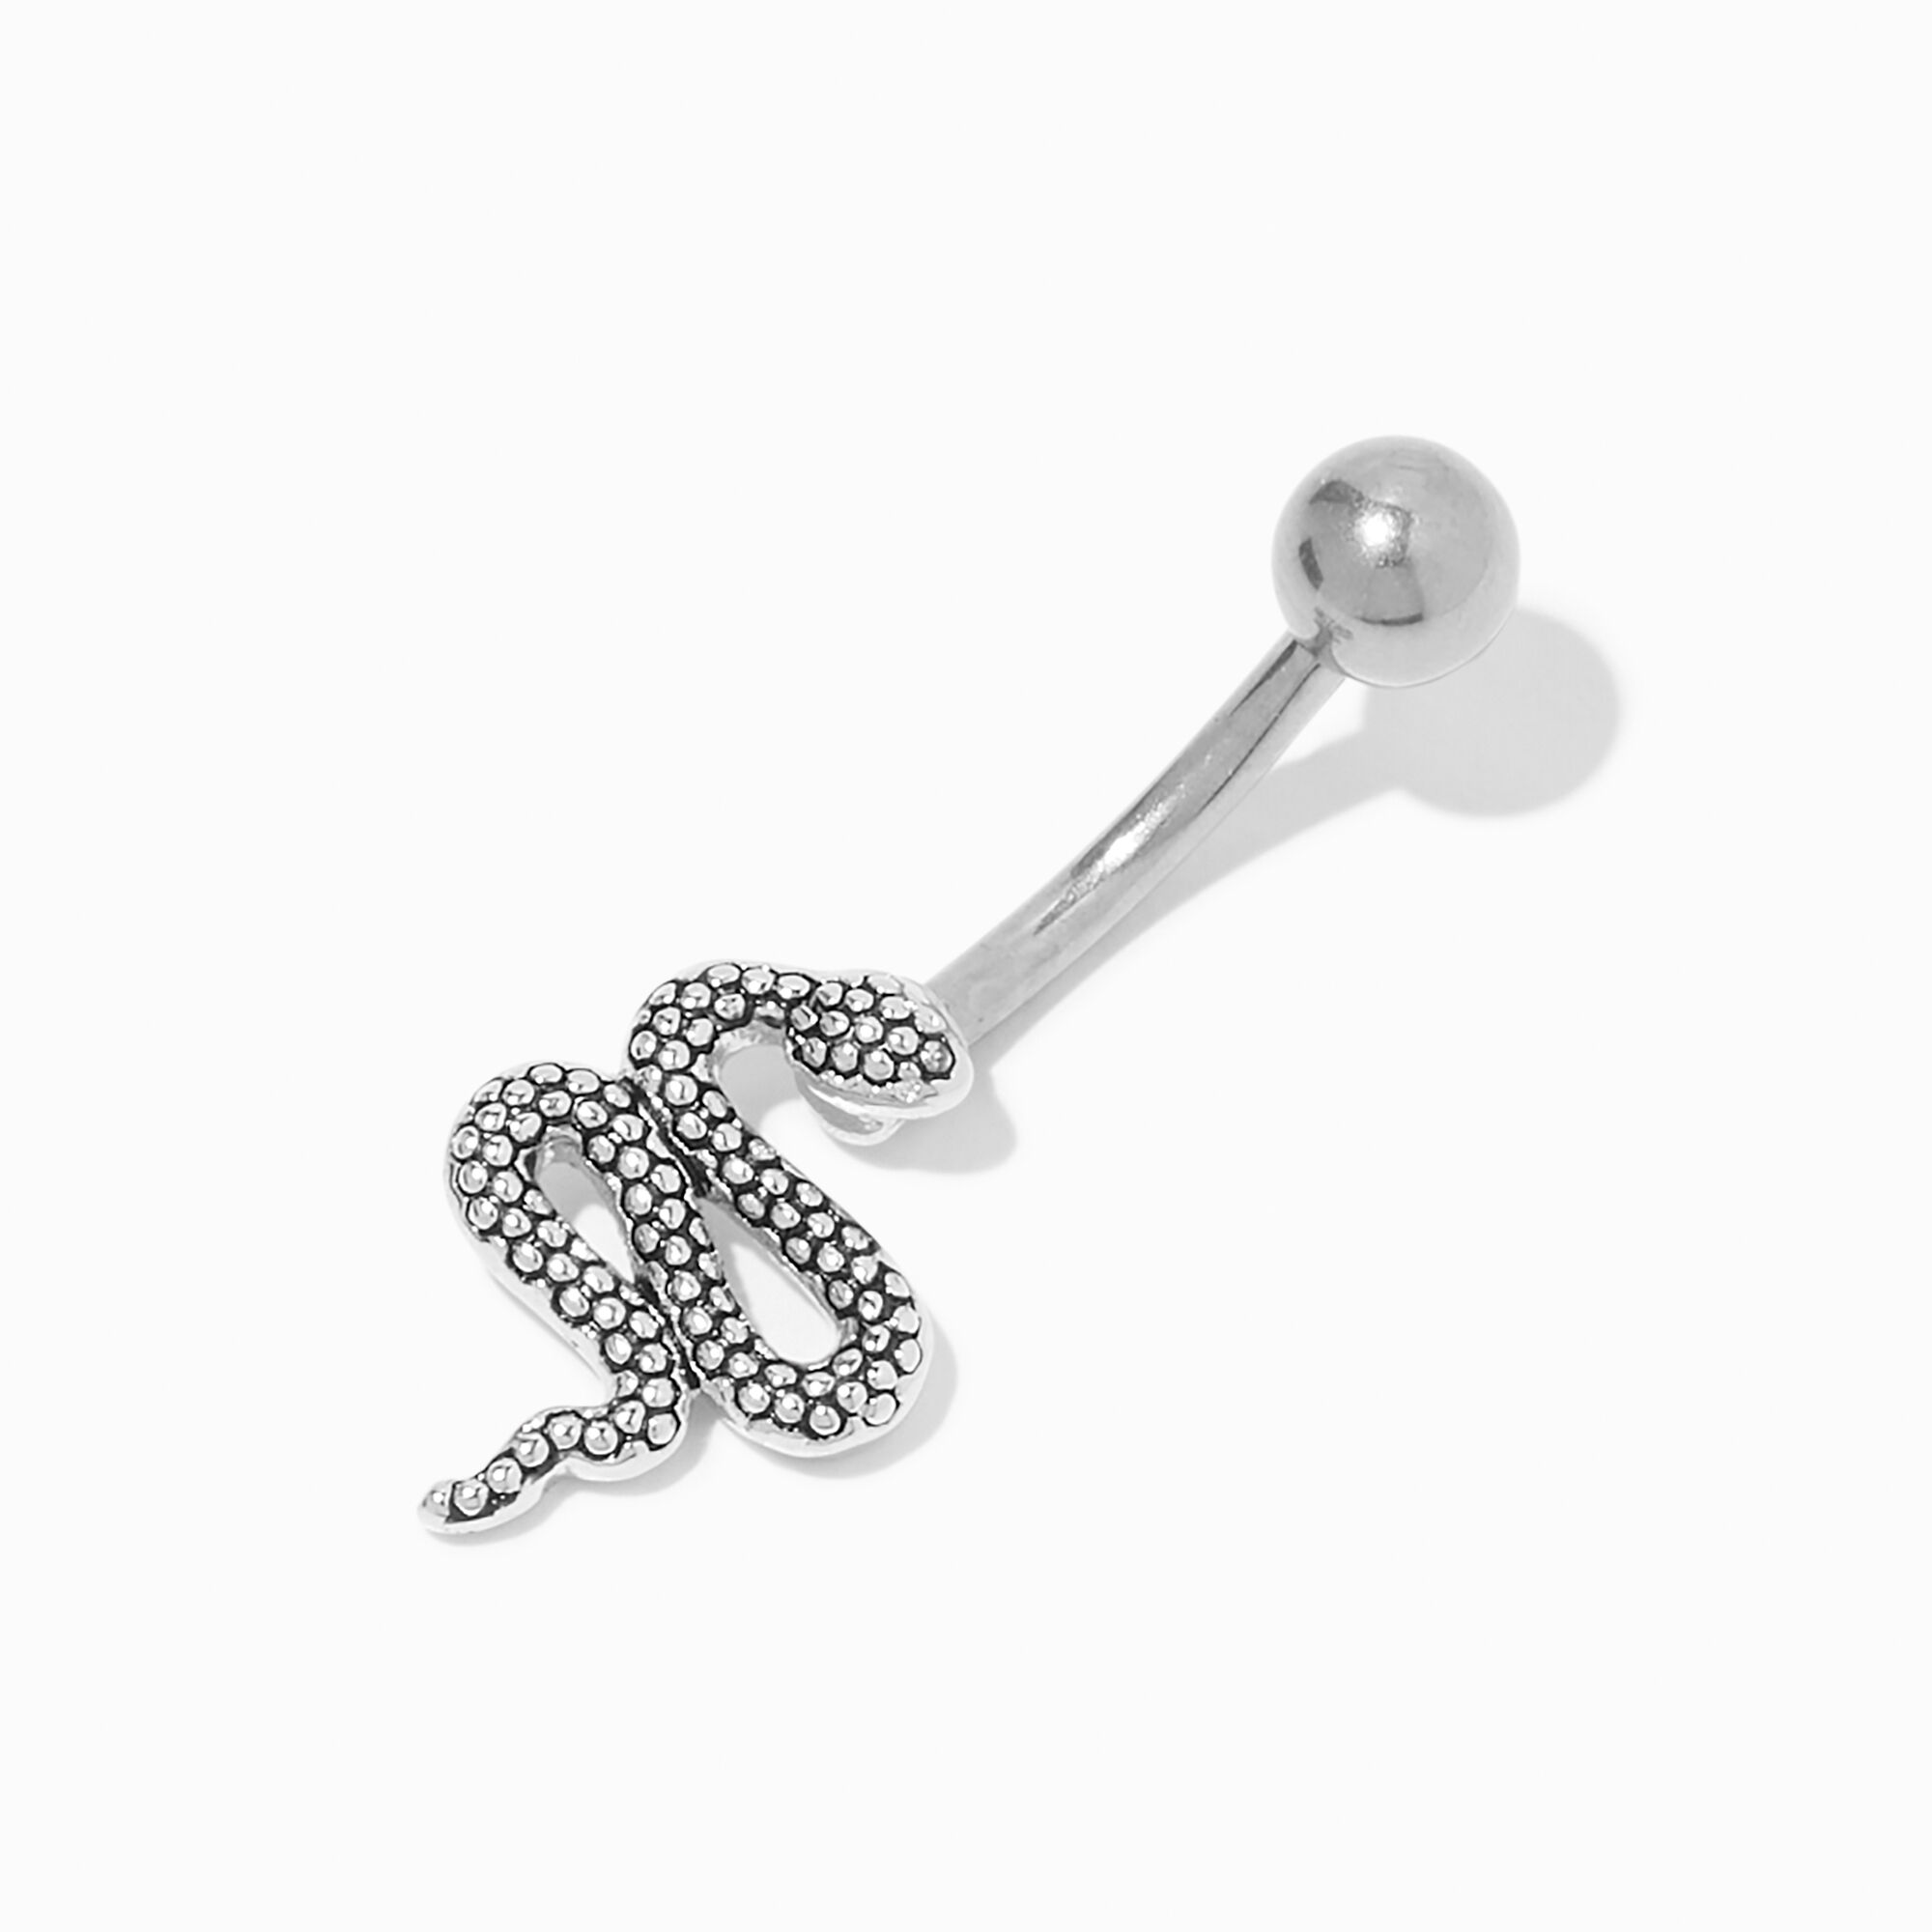 View Claires Titanium 14G Snake Belly Ring Silver information